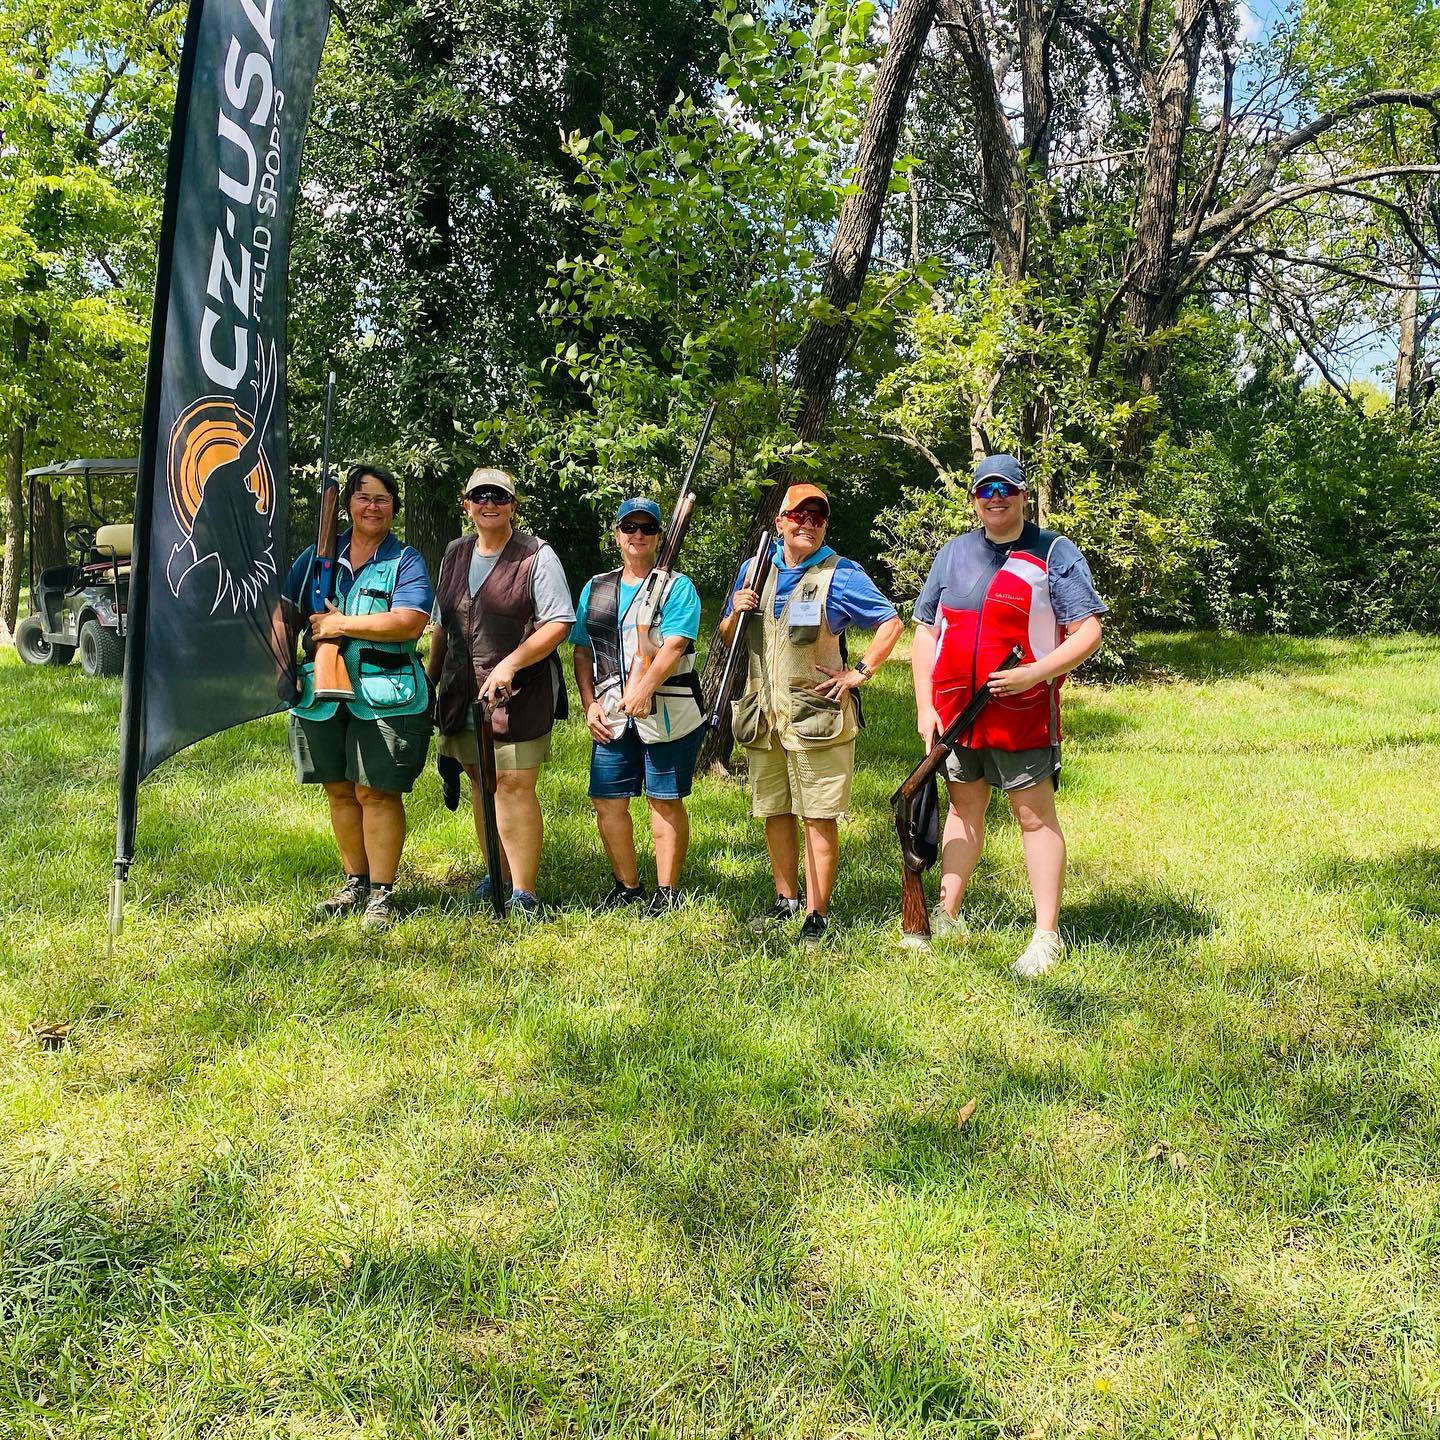 82 competitors participated in the 2nd Annual Women’s Clays Extravaganza